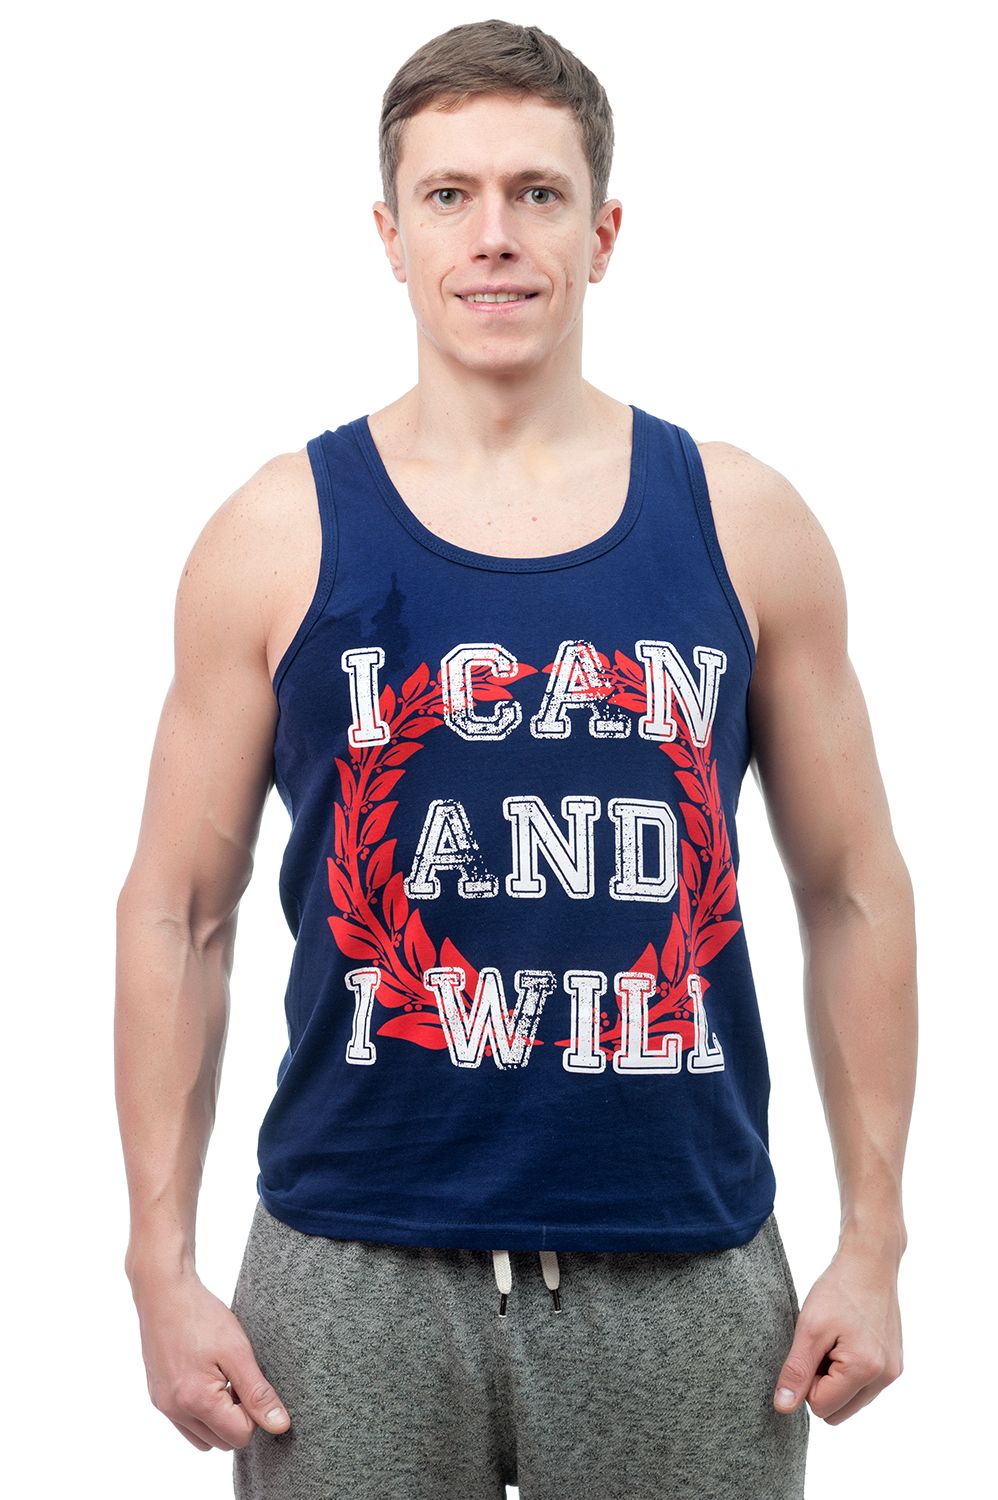 Men`s t-shirt I can and i will, dark blue, wreath, size S